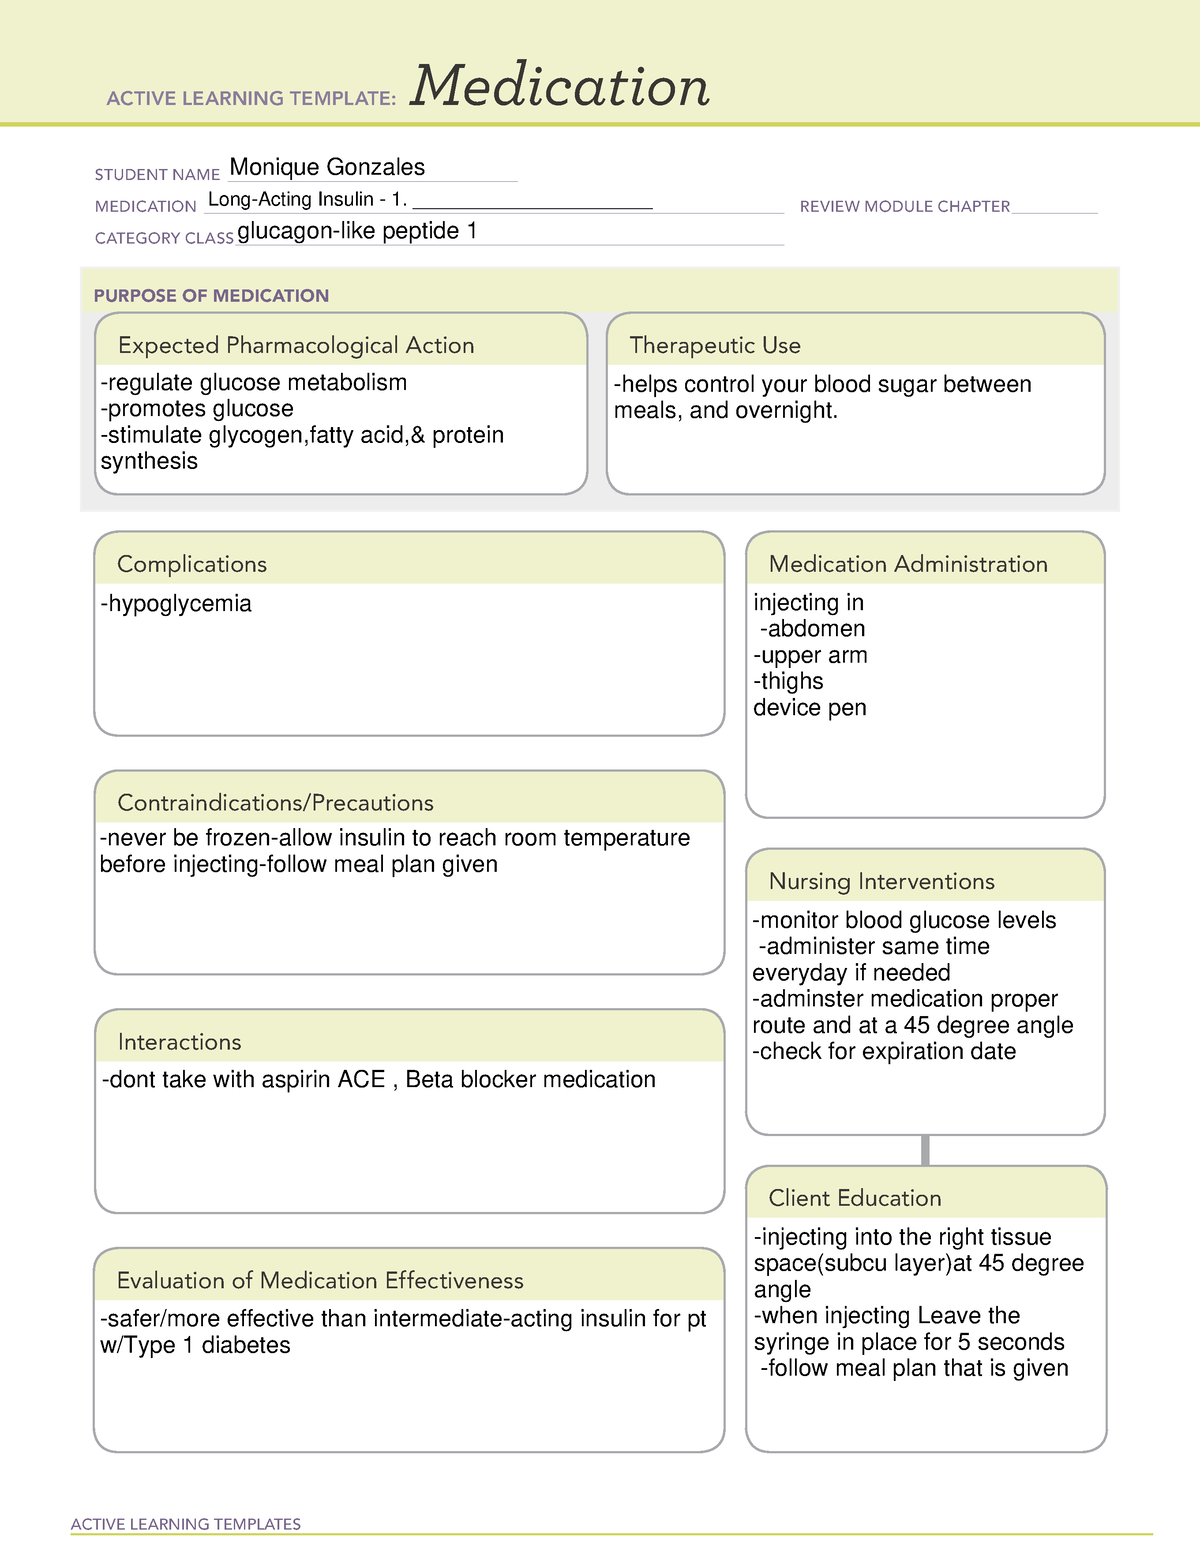 Long acting insulin Active learning template ACTIVE LEARNING